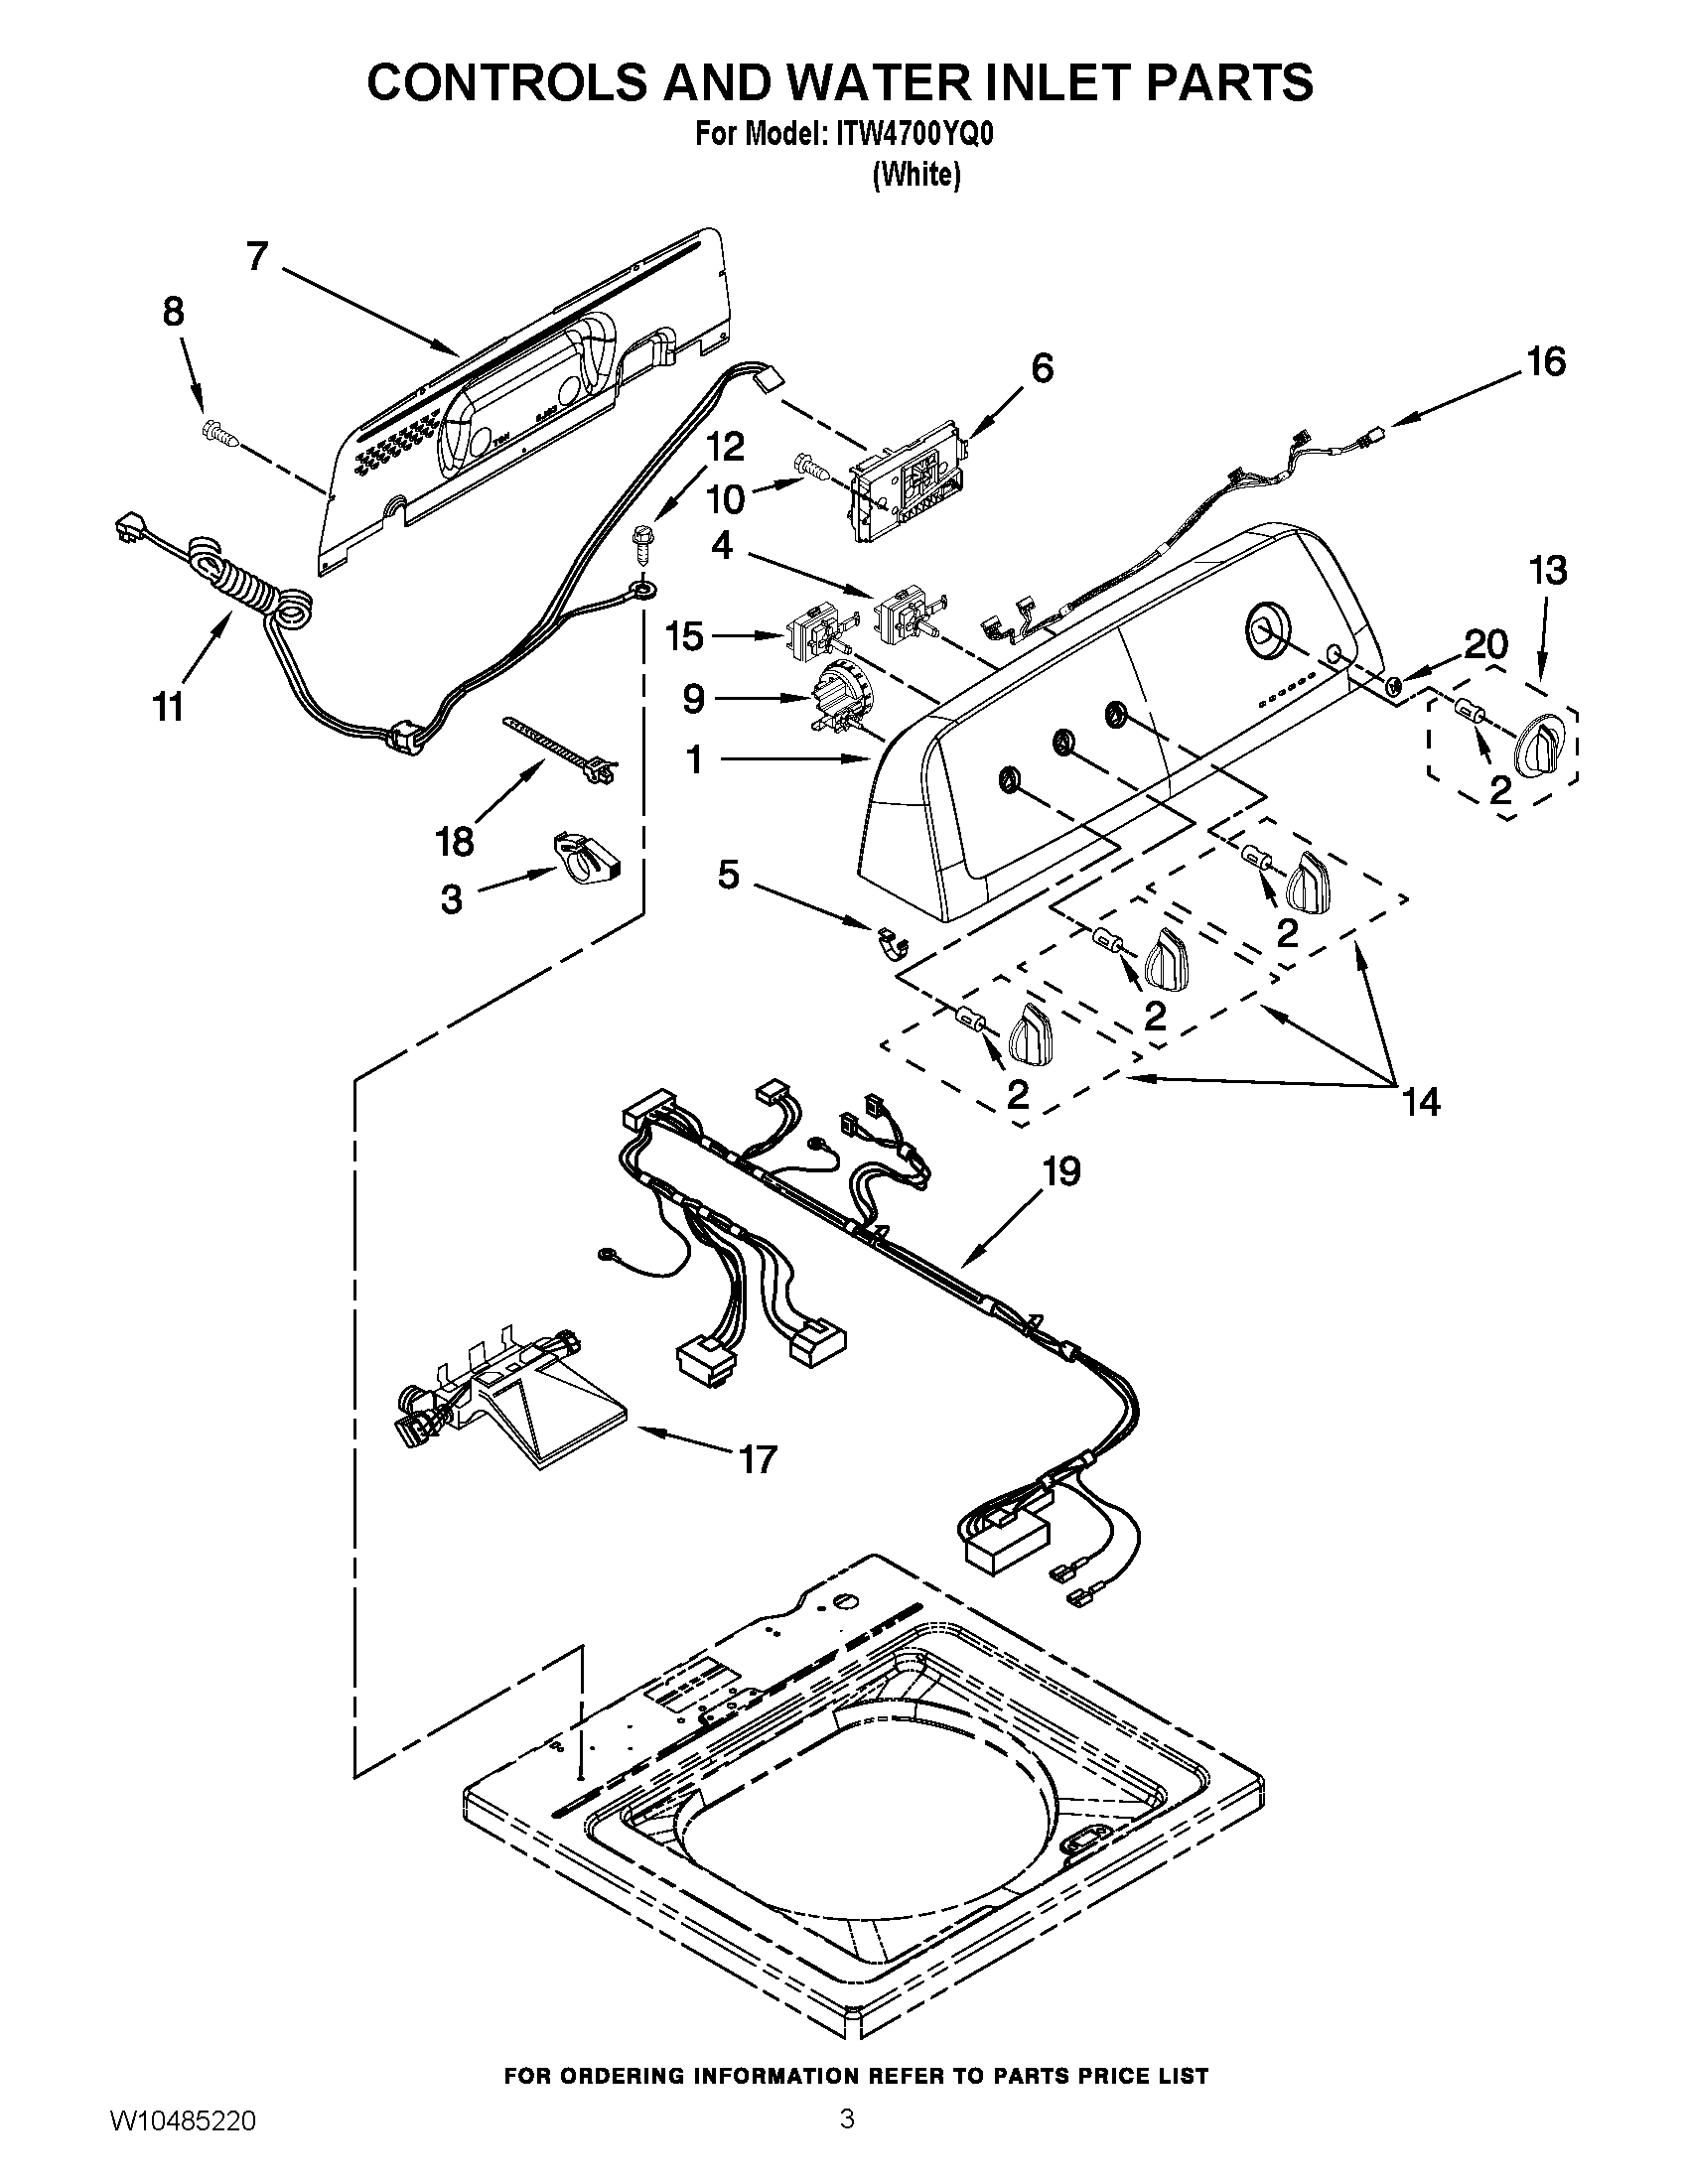 02 - CONTROLS AND WATER INLET PARTS